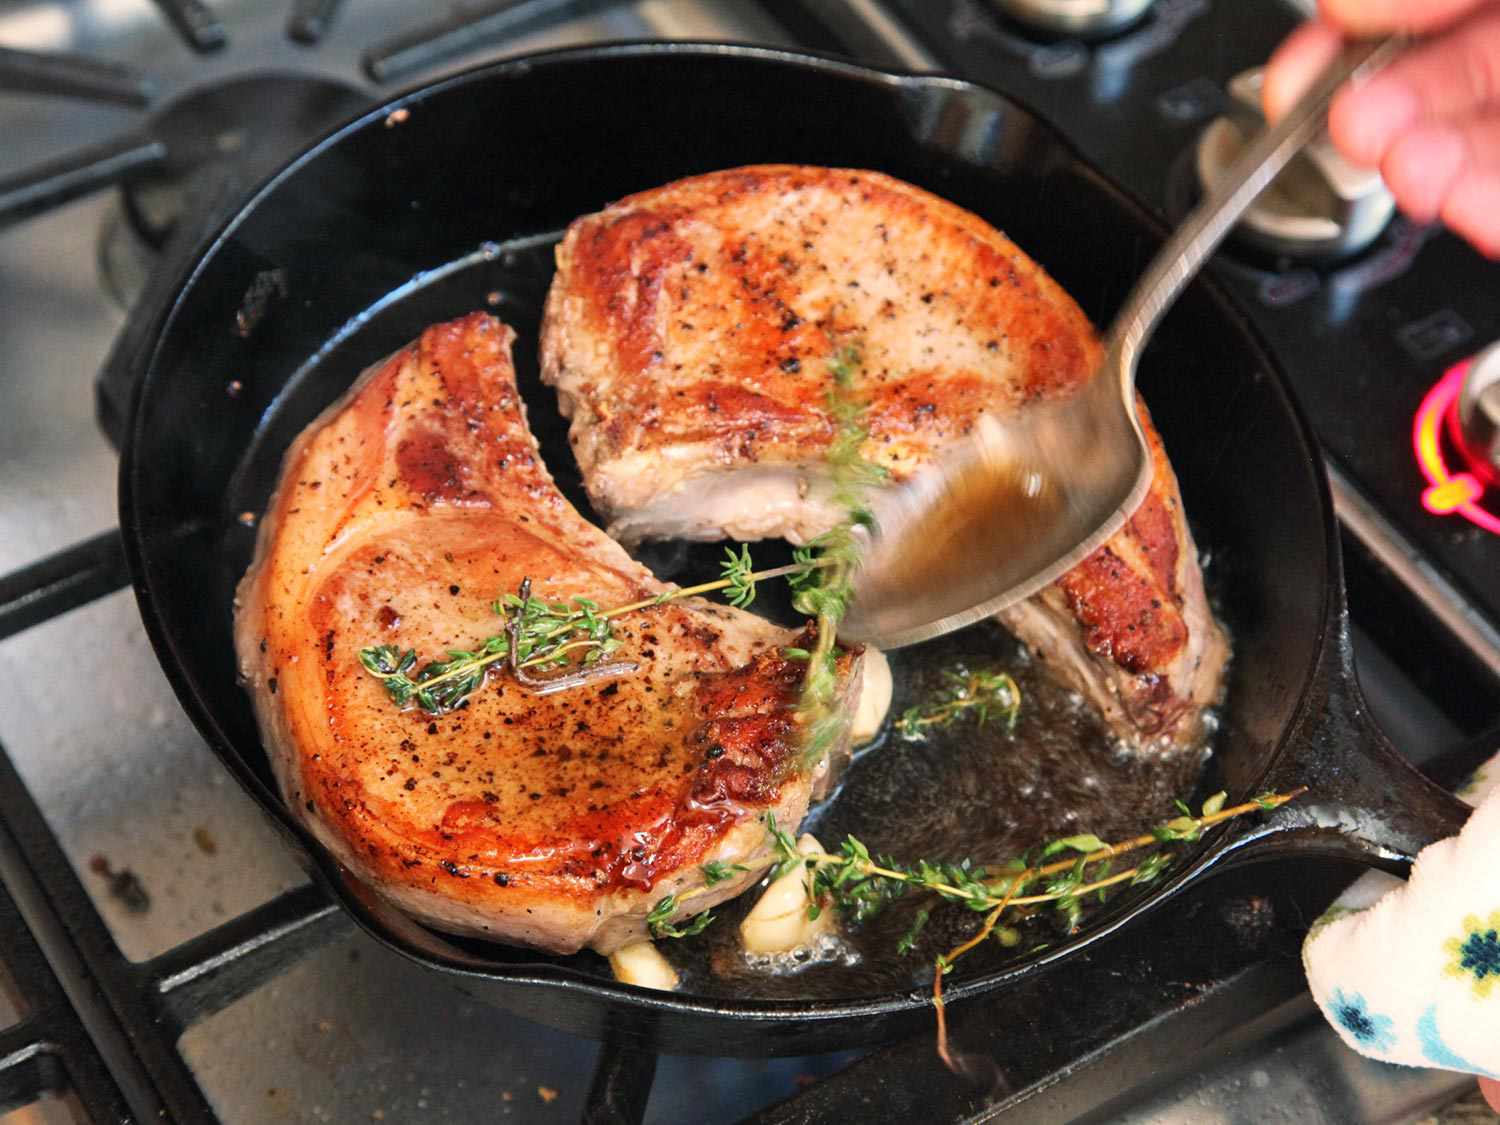 Basting sous vide pork chops in a cast iron skillet with butter, garlic, and thyme.